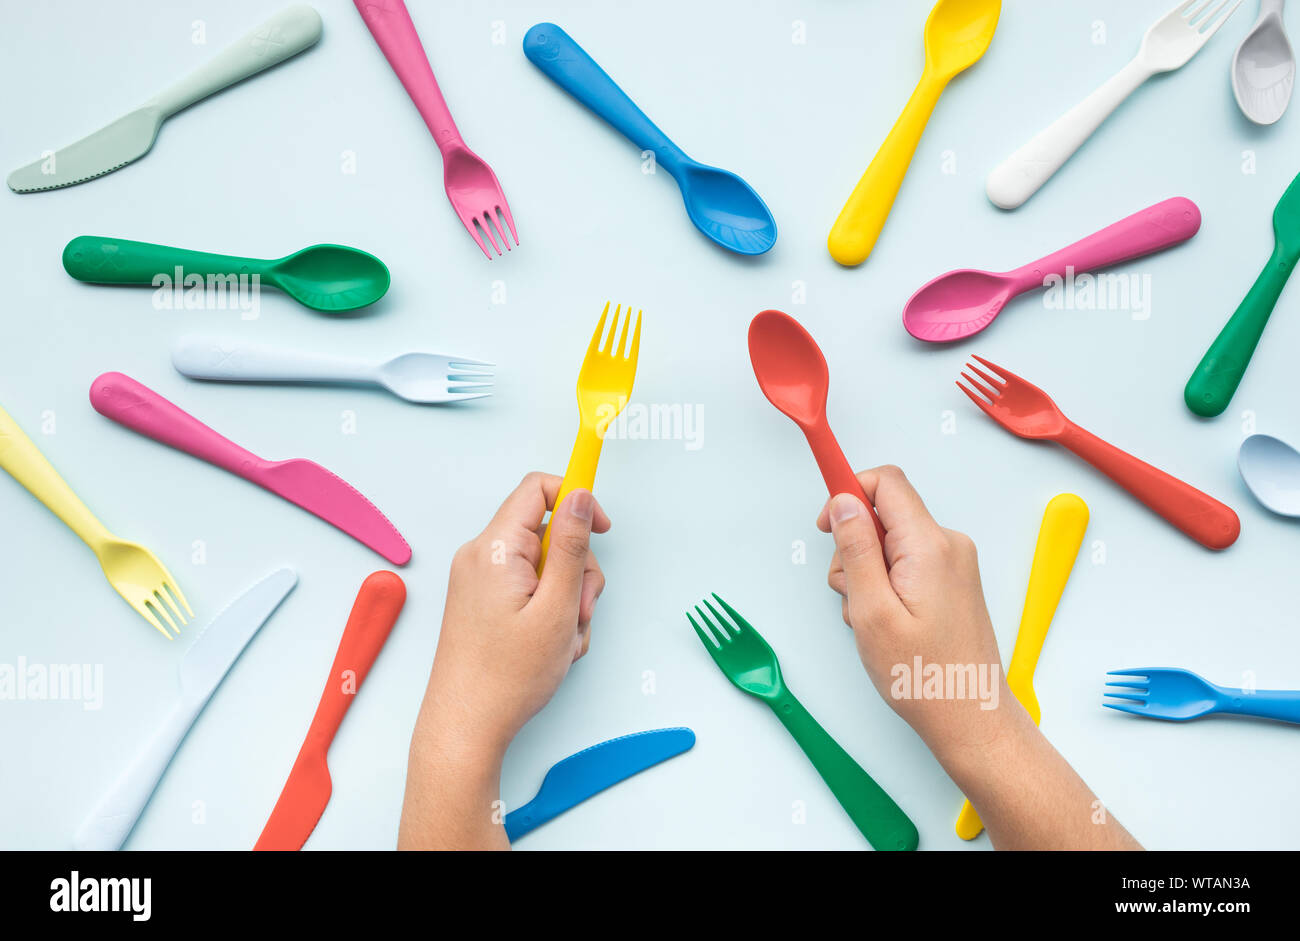 Top view of hand holding colorful spoon and fork with another element on color table.flat lay design Stock Photo